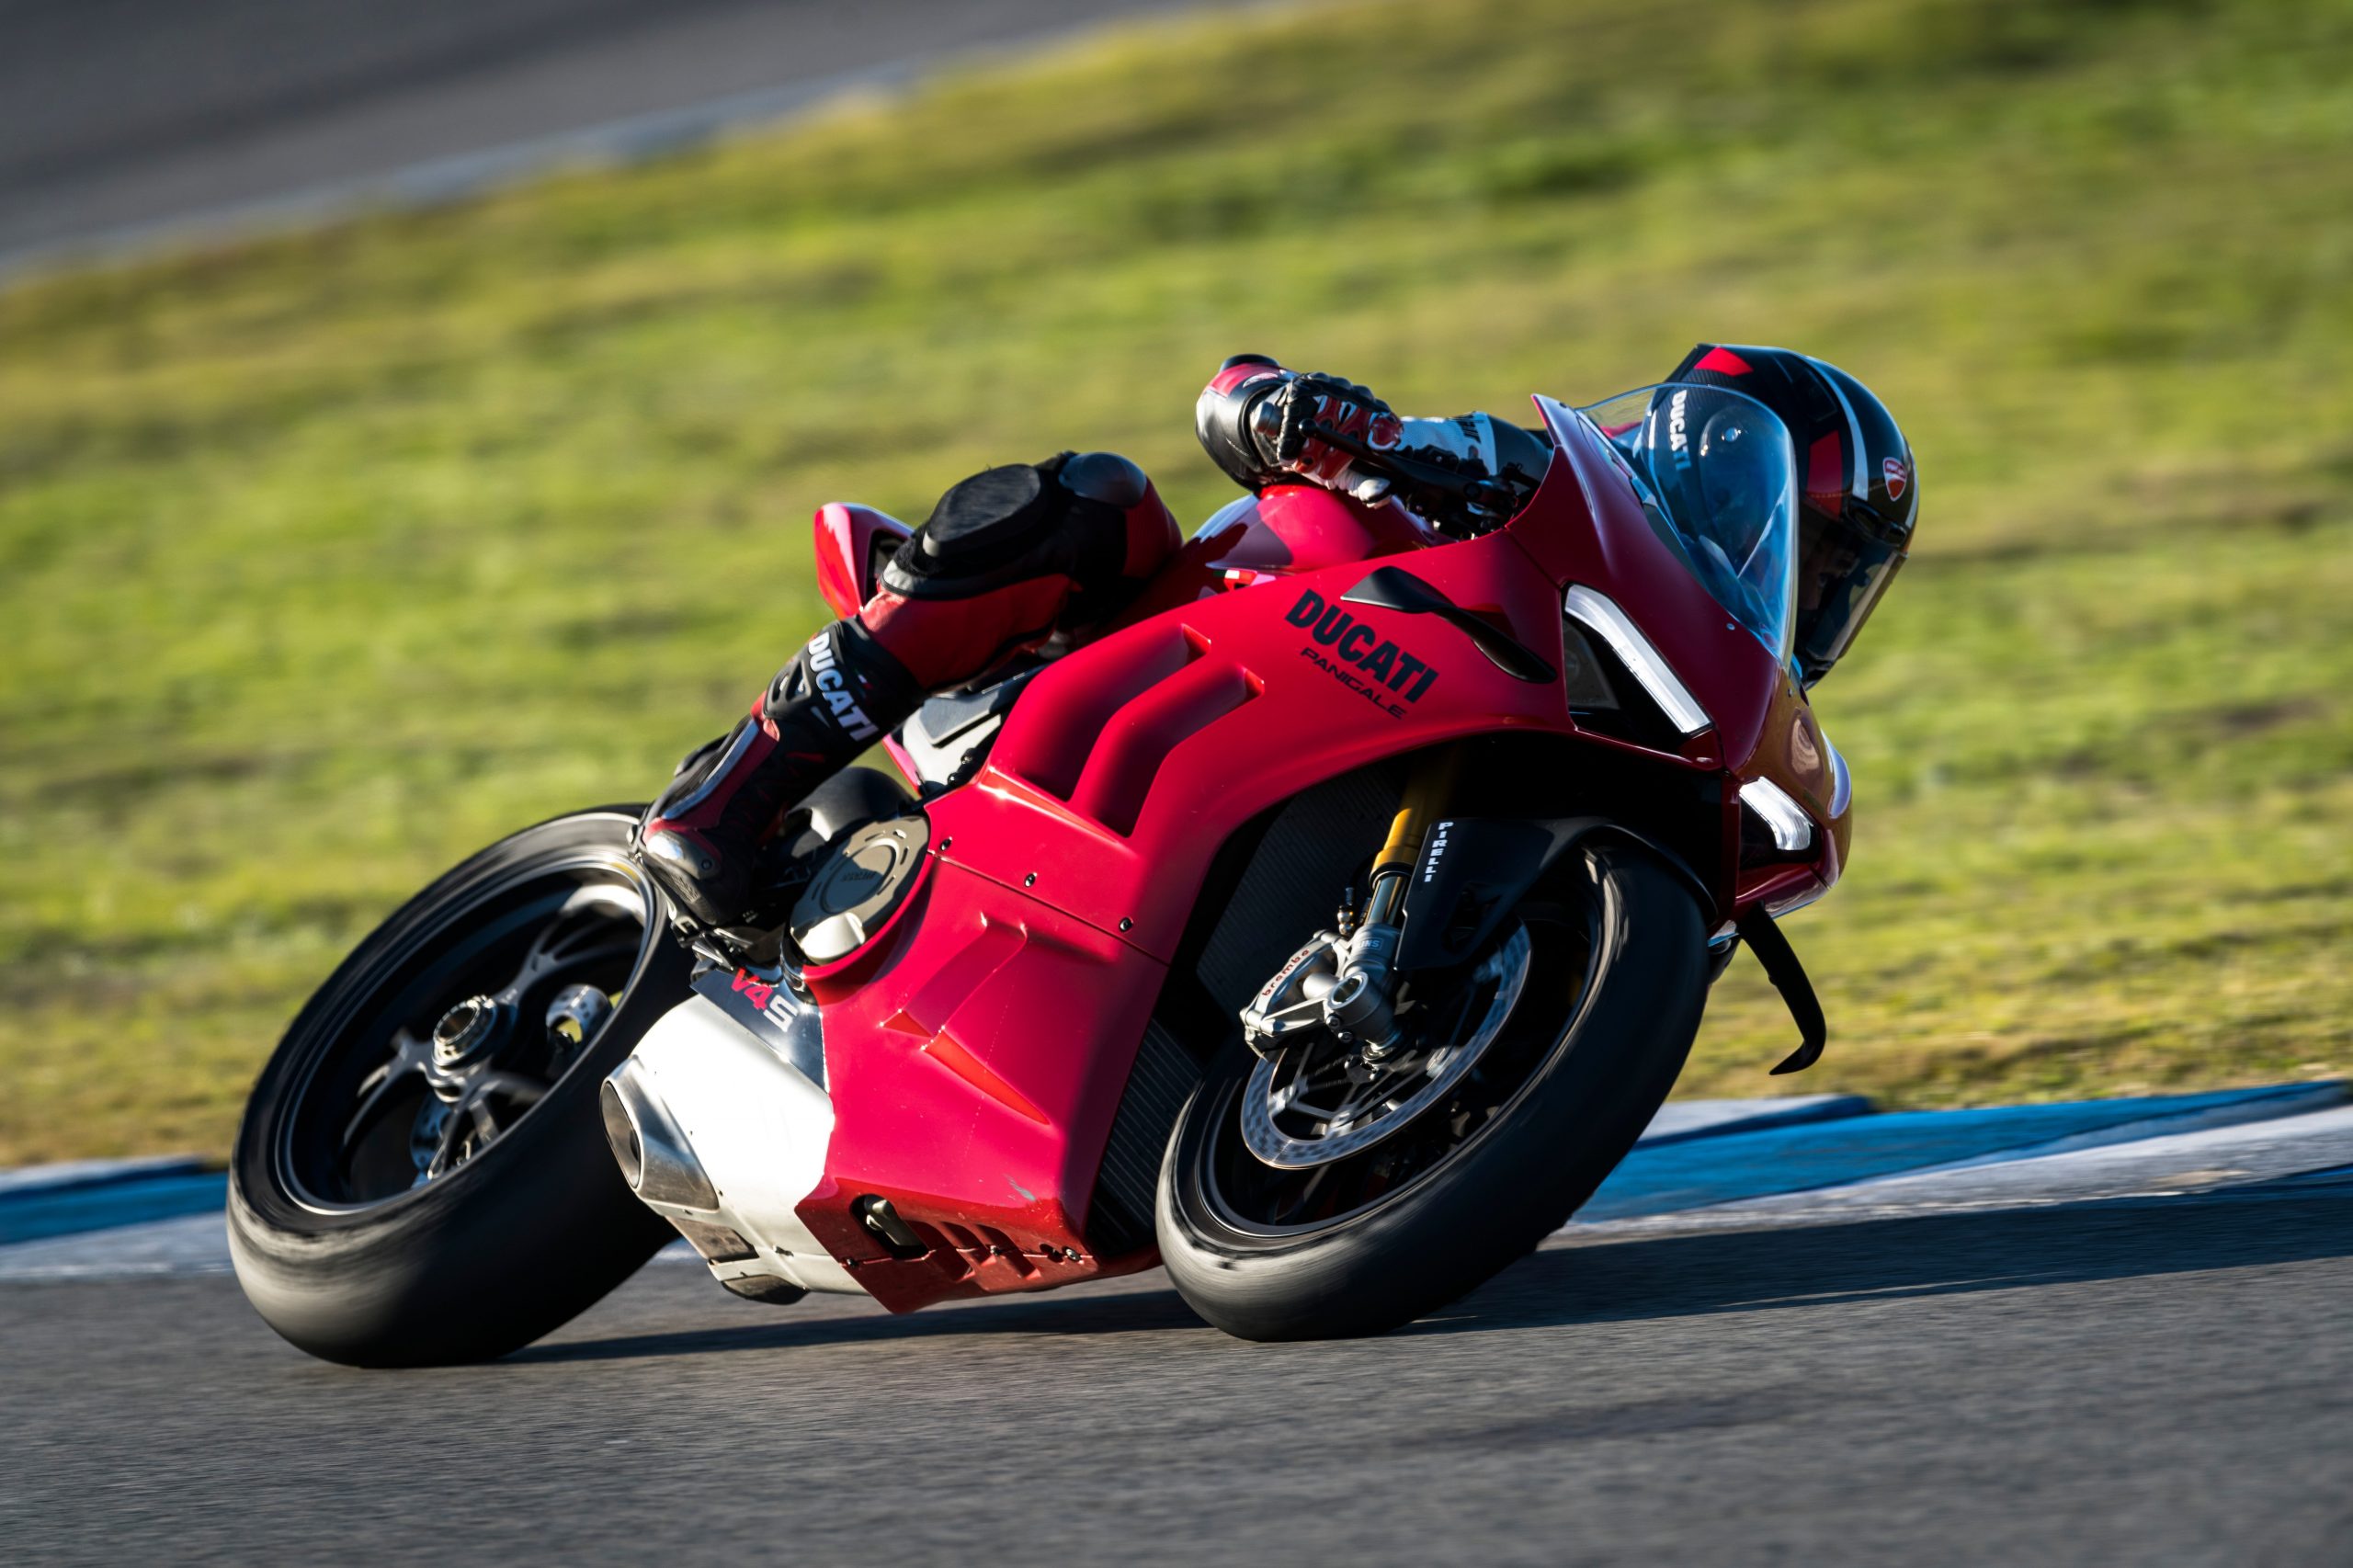 DUCATI PANIGALE V4S ACTION 023 UC355493 High scaled